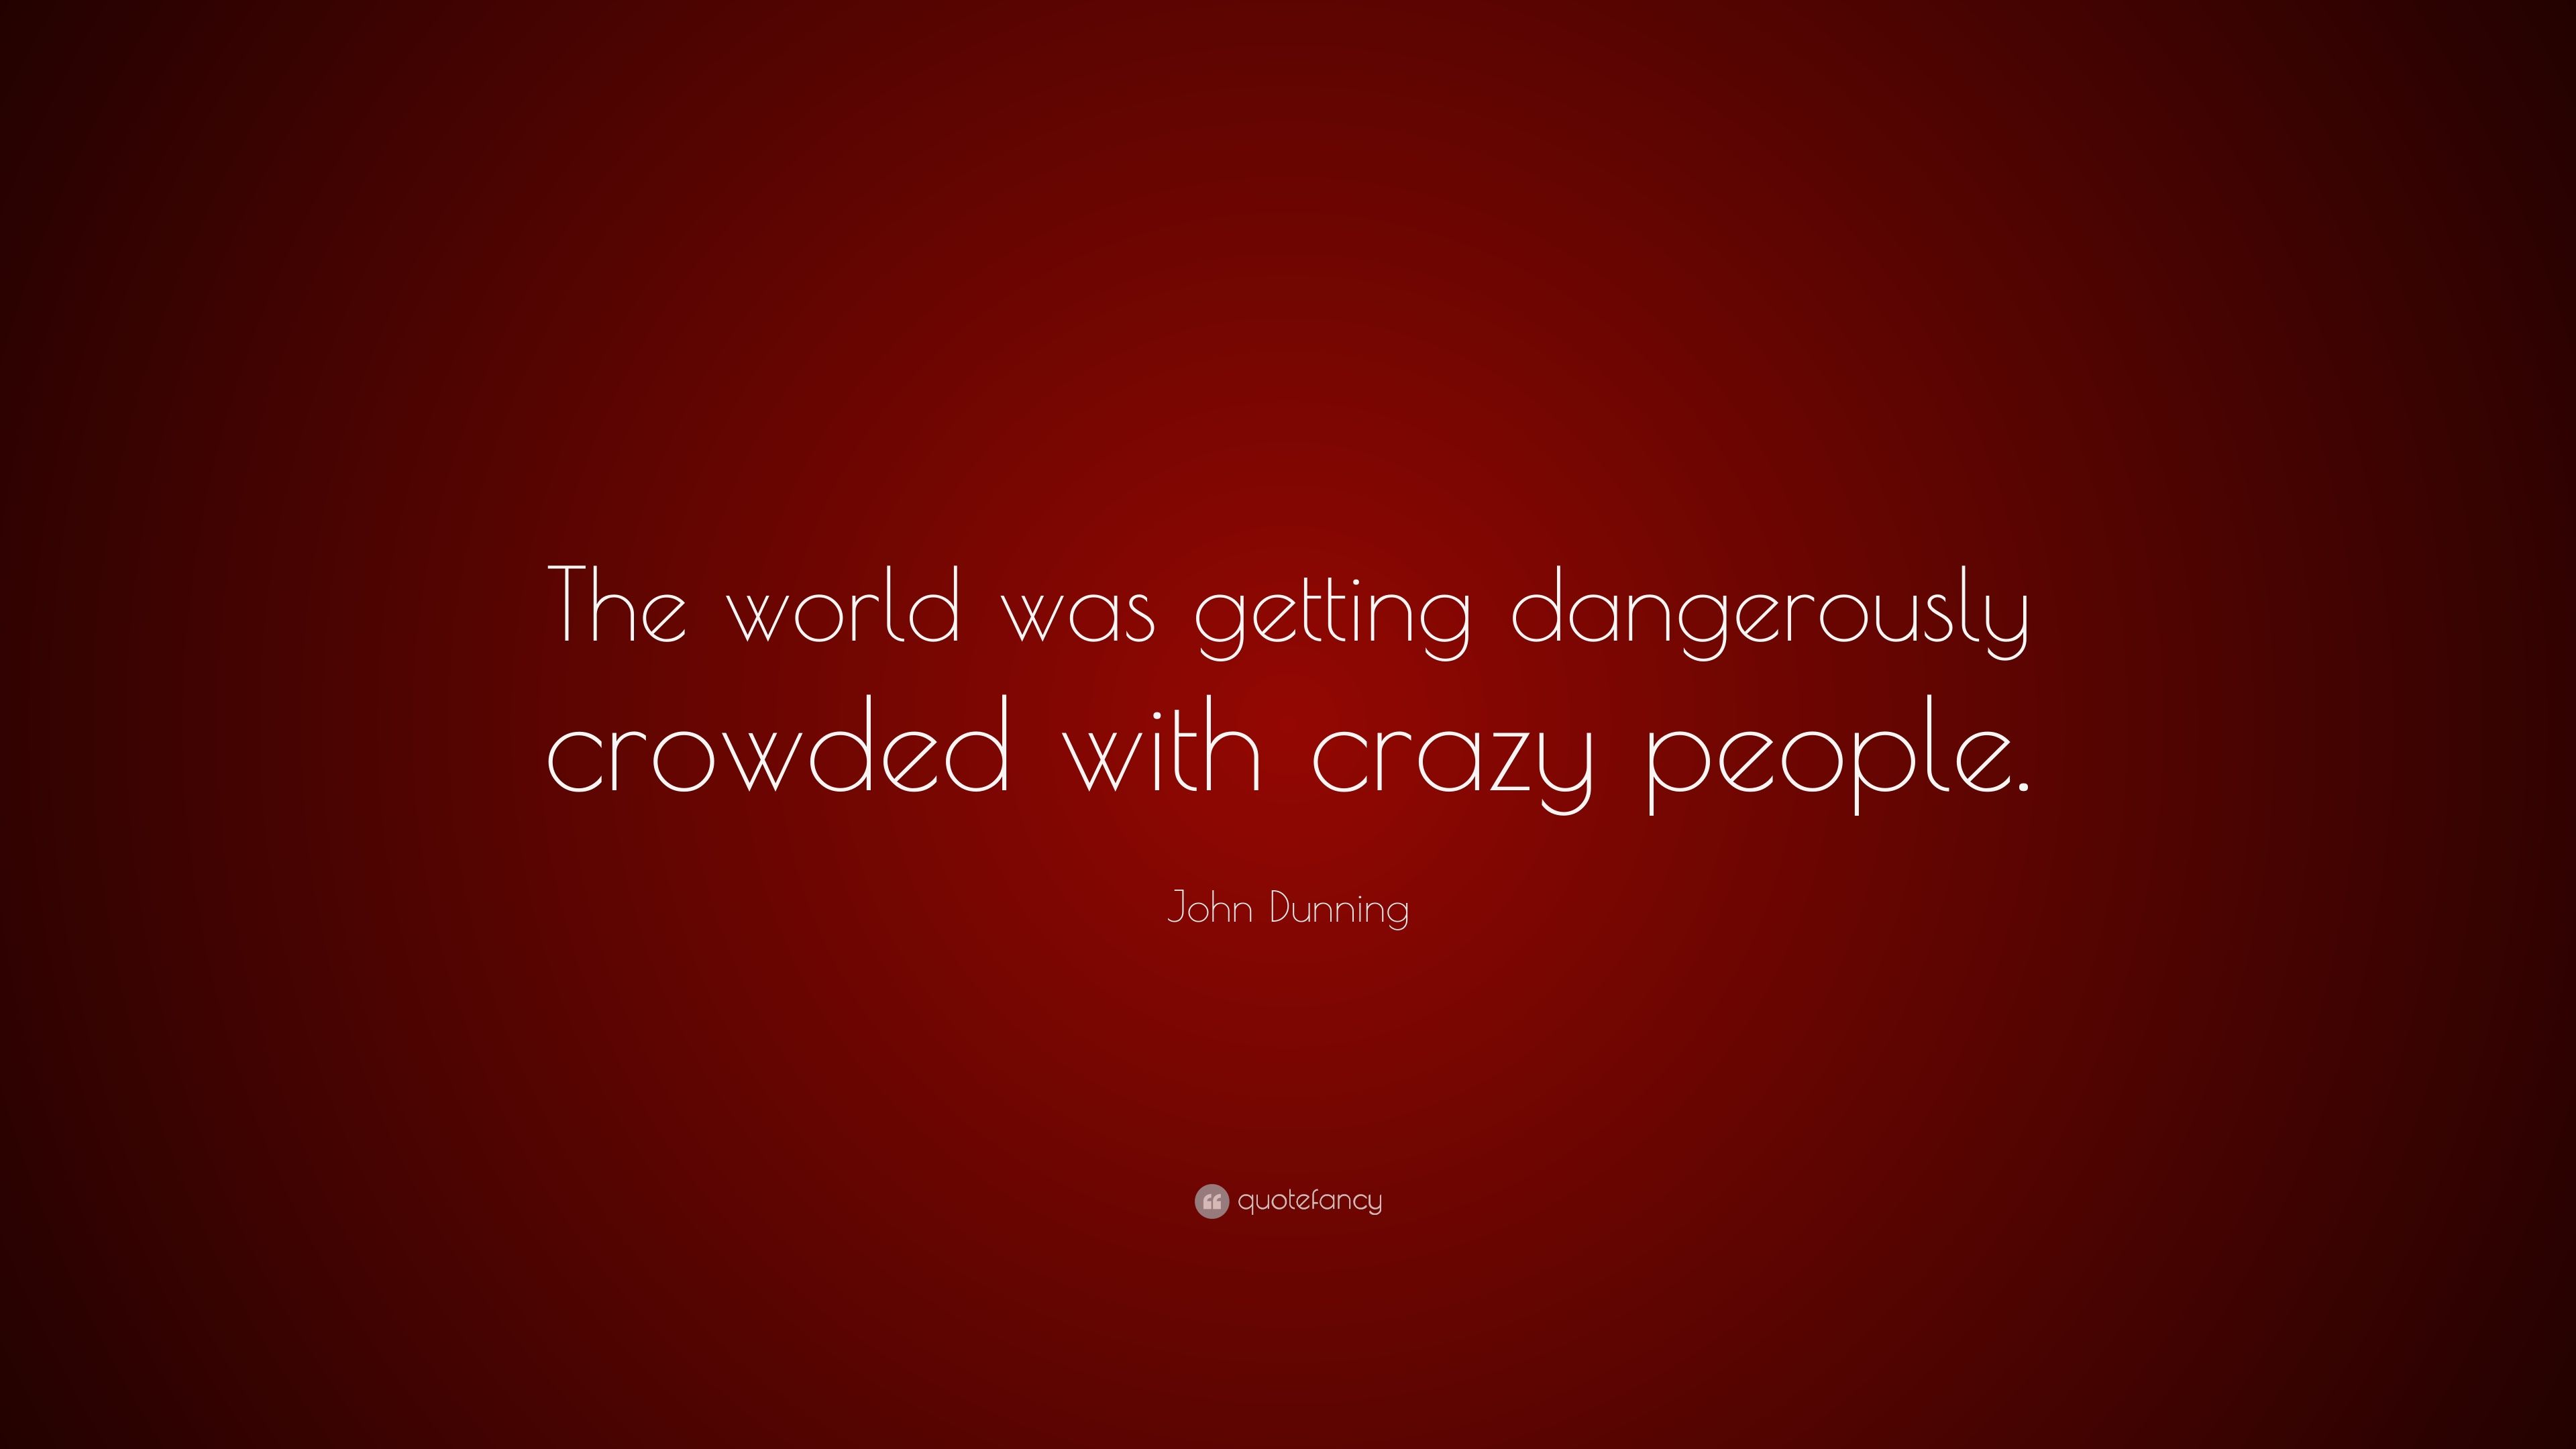 John Dunning Quote: “The world was .quotefancy.com